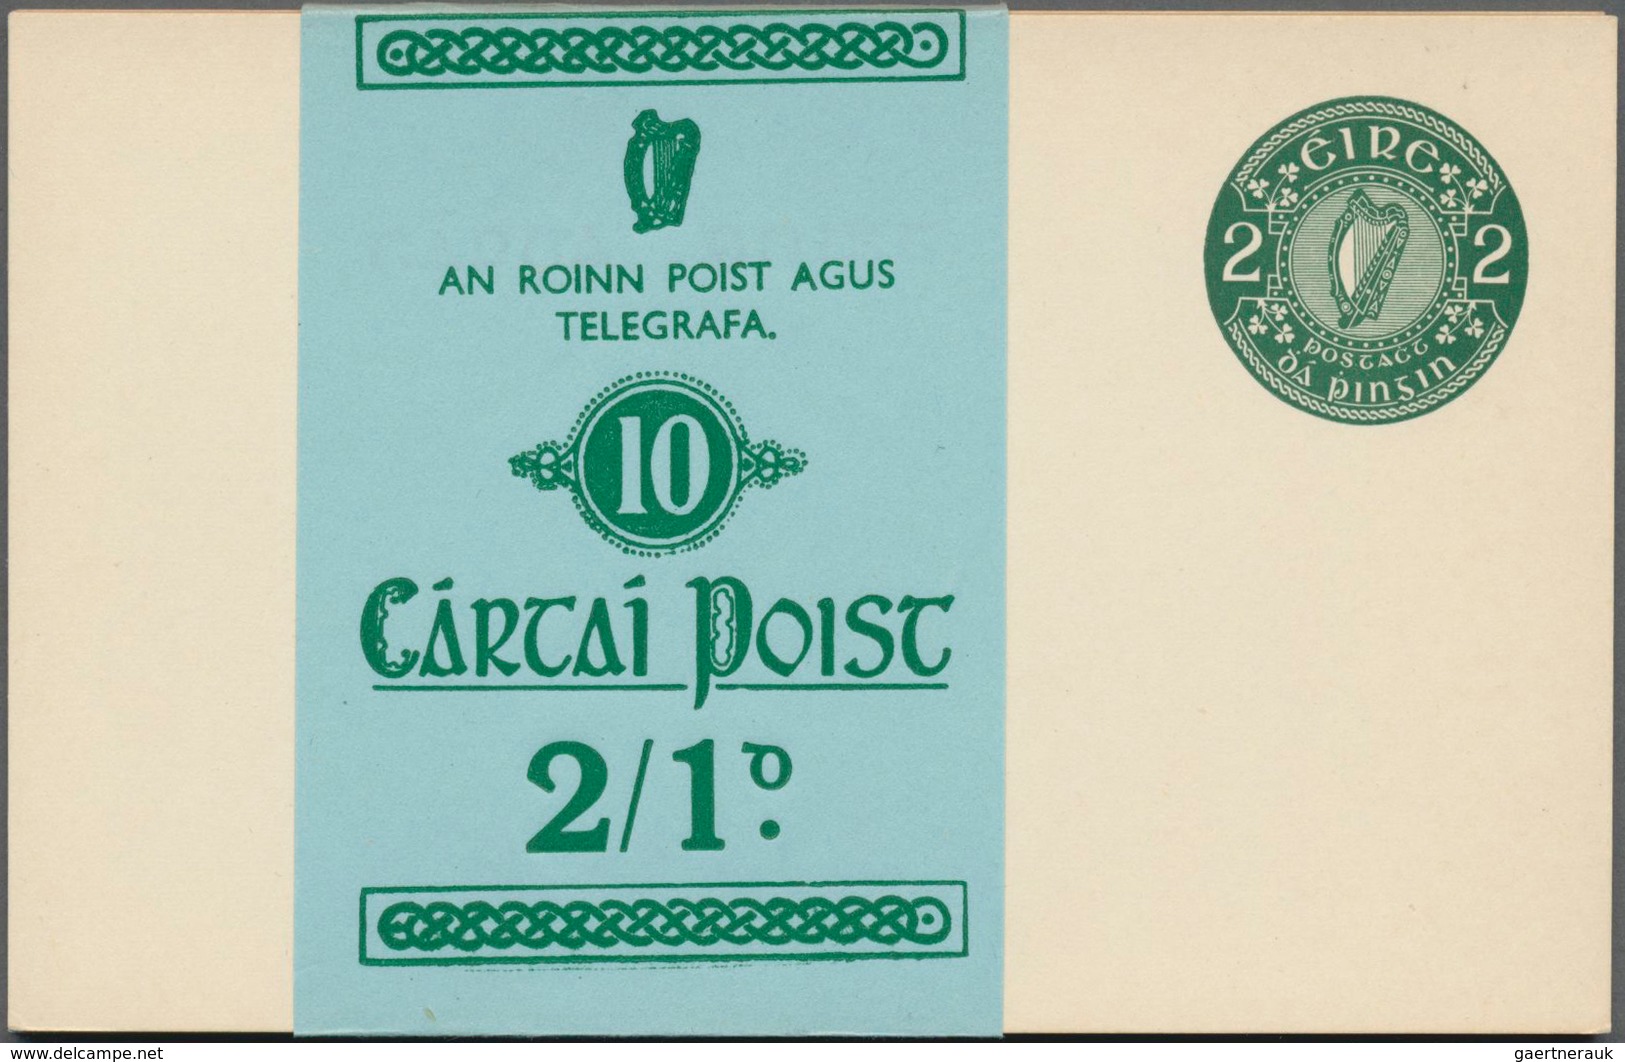 Irland - Ganzsachen: 1878/2002, approx. 490 pieces of postal stationeries, including forerunners use